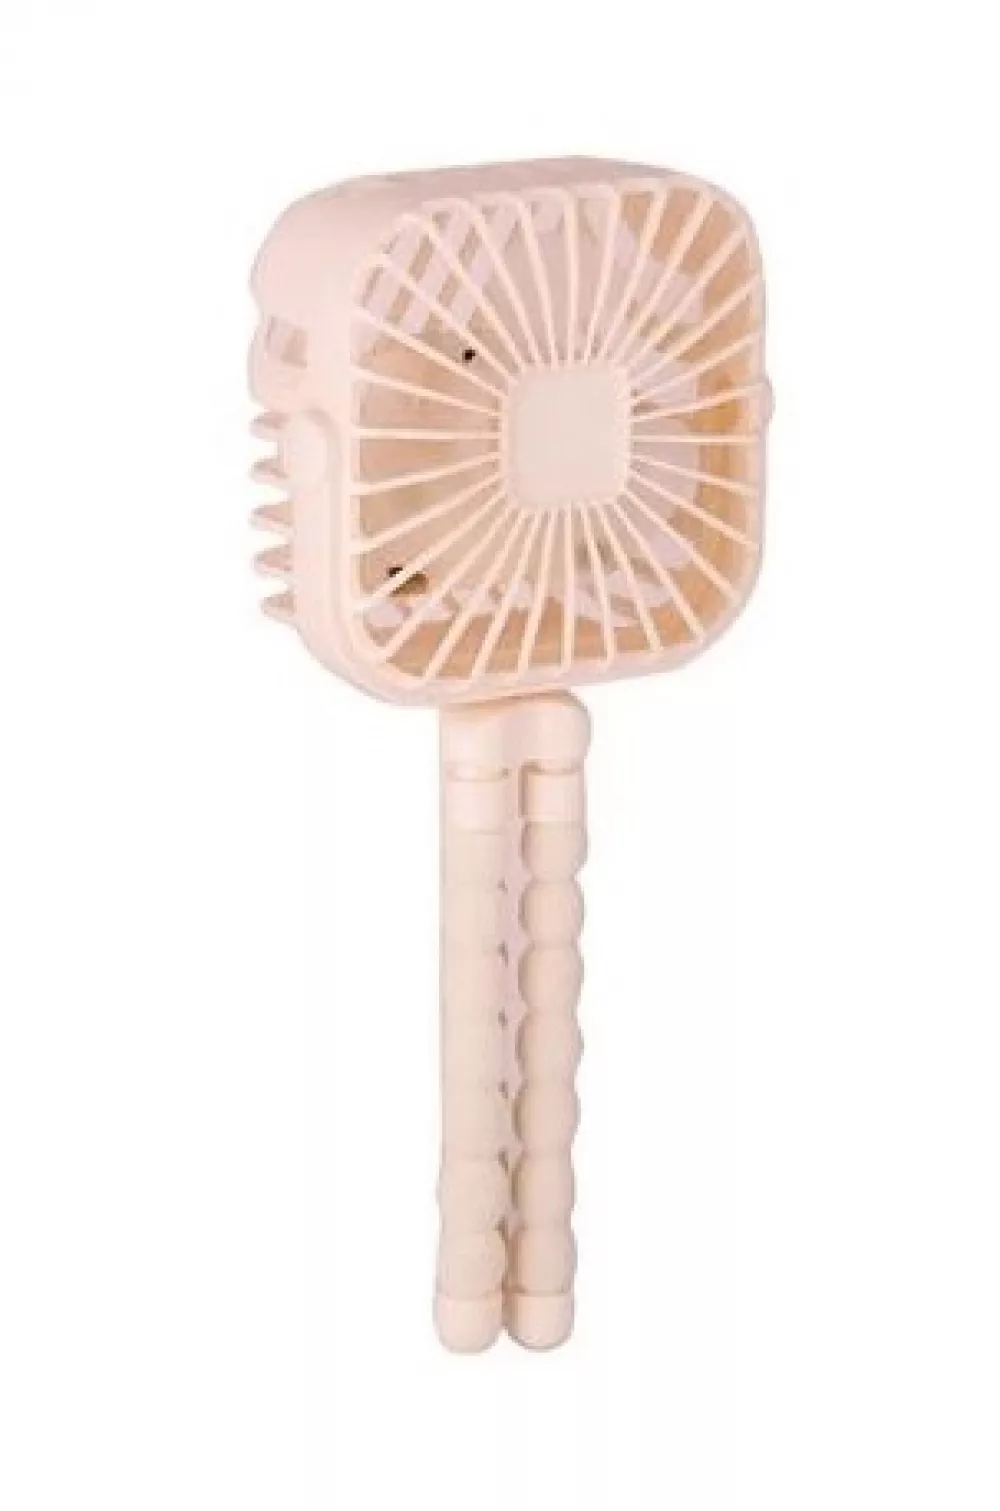 Mini Handheld, Personal and Portable Fan with Flexible Tripod